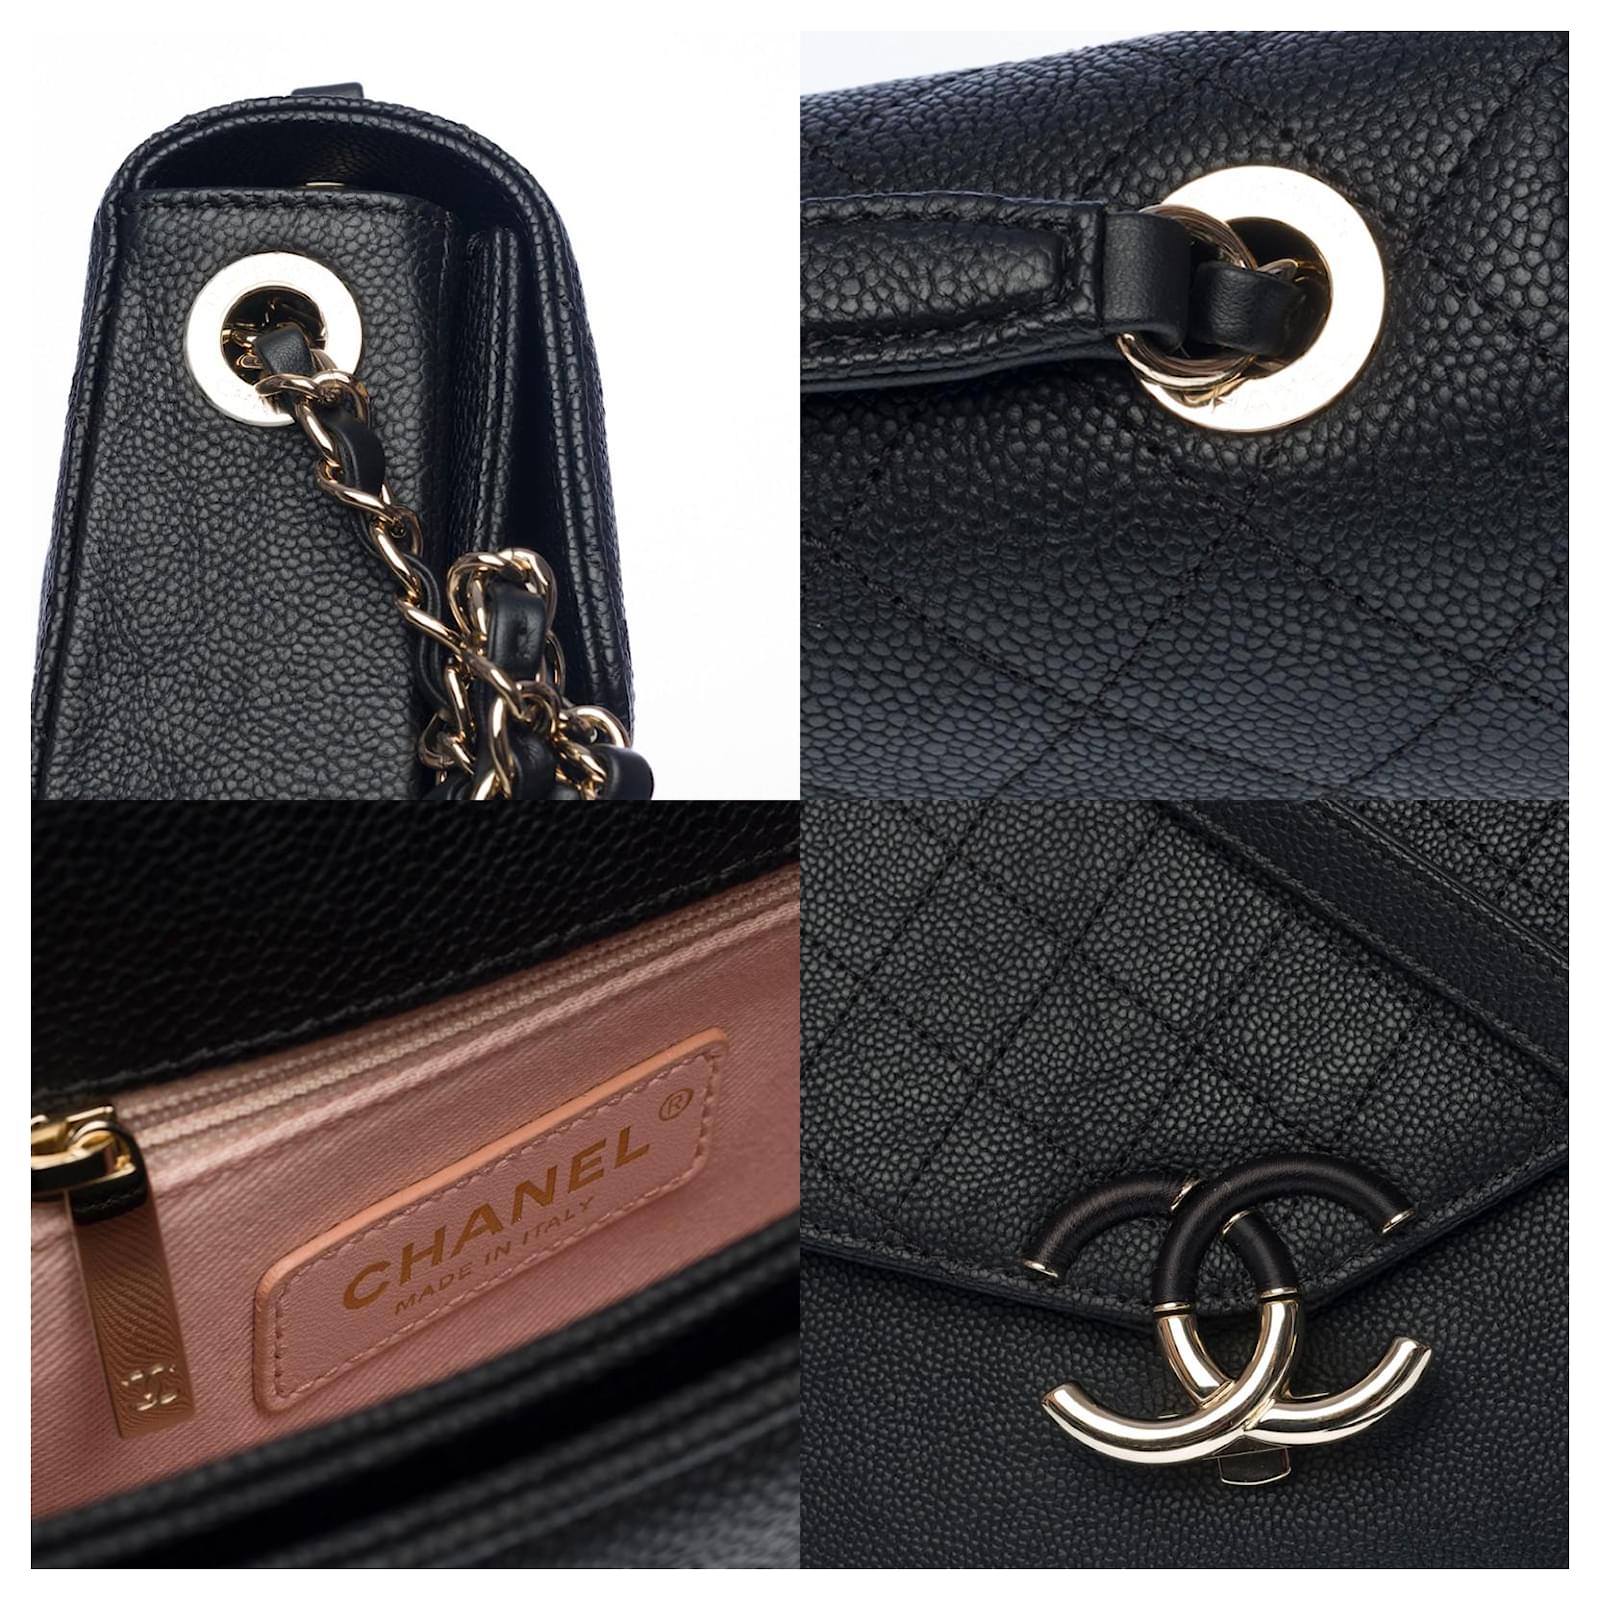 Chanel Cuba Collection Black Caviar Leather CC Flap Bag with Gold, Lot  #58020